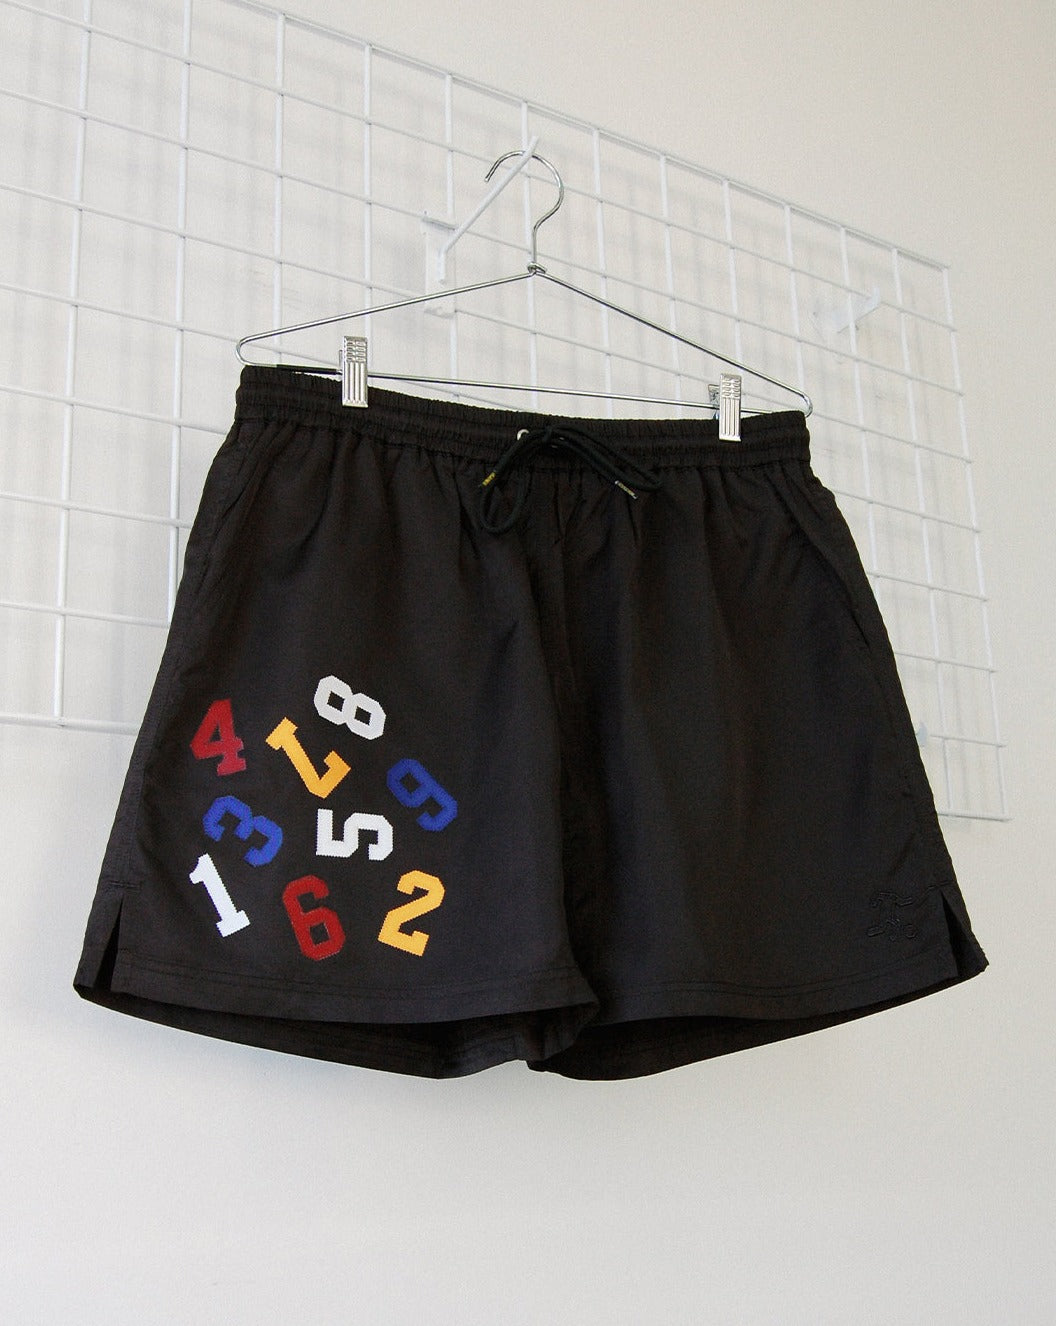 PLAYER-ISSUE TEAM SHORTS